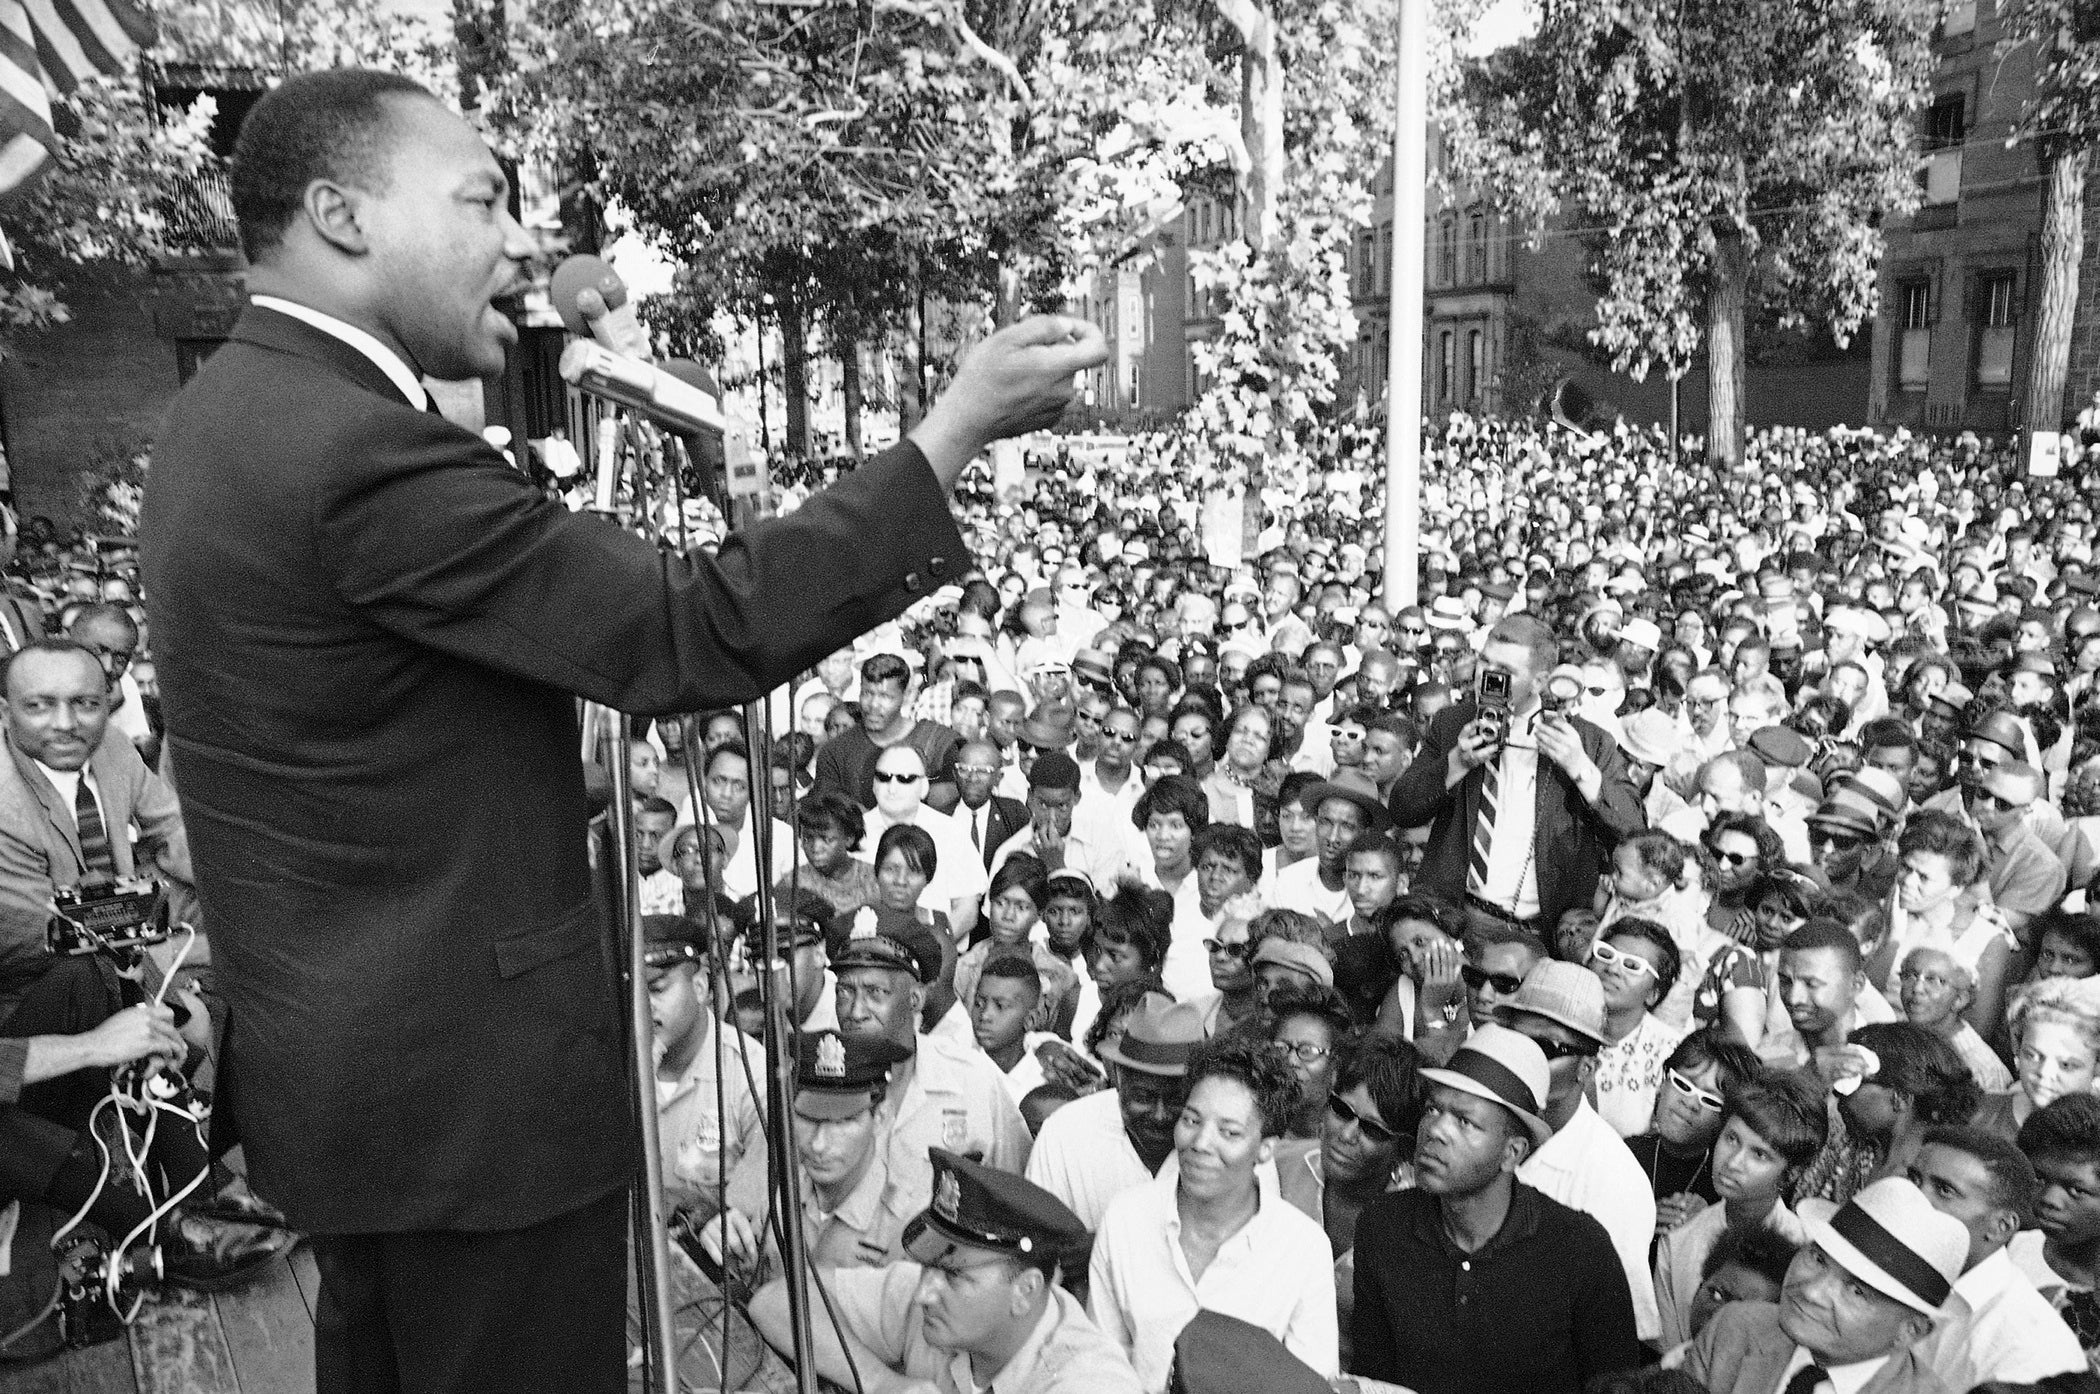 Pivotal Events of the American Civil Rights Movement A Virtual Living Legacy  Pilgrimage - Living Legacy Project